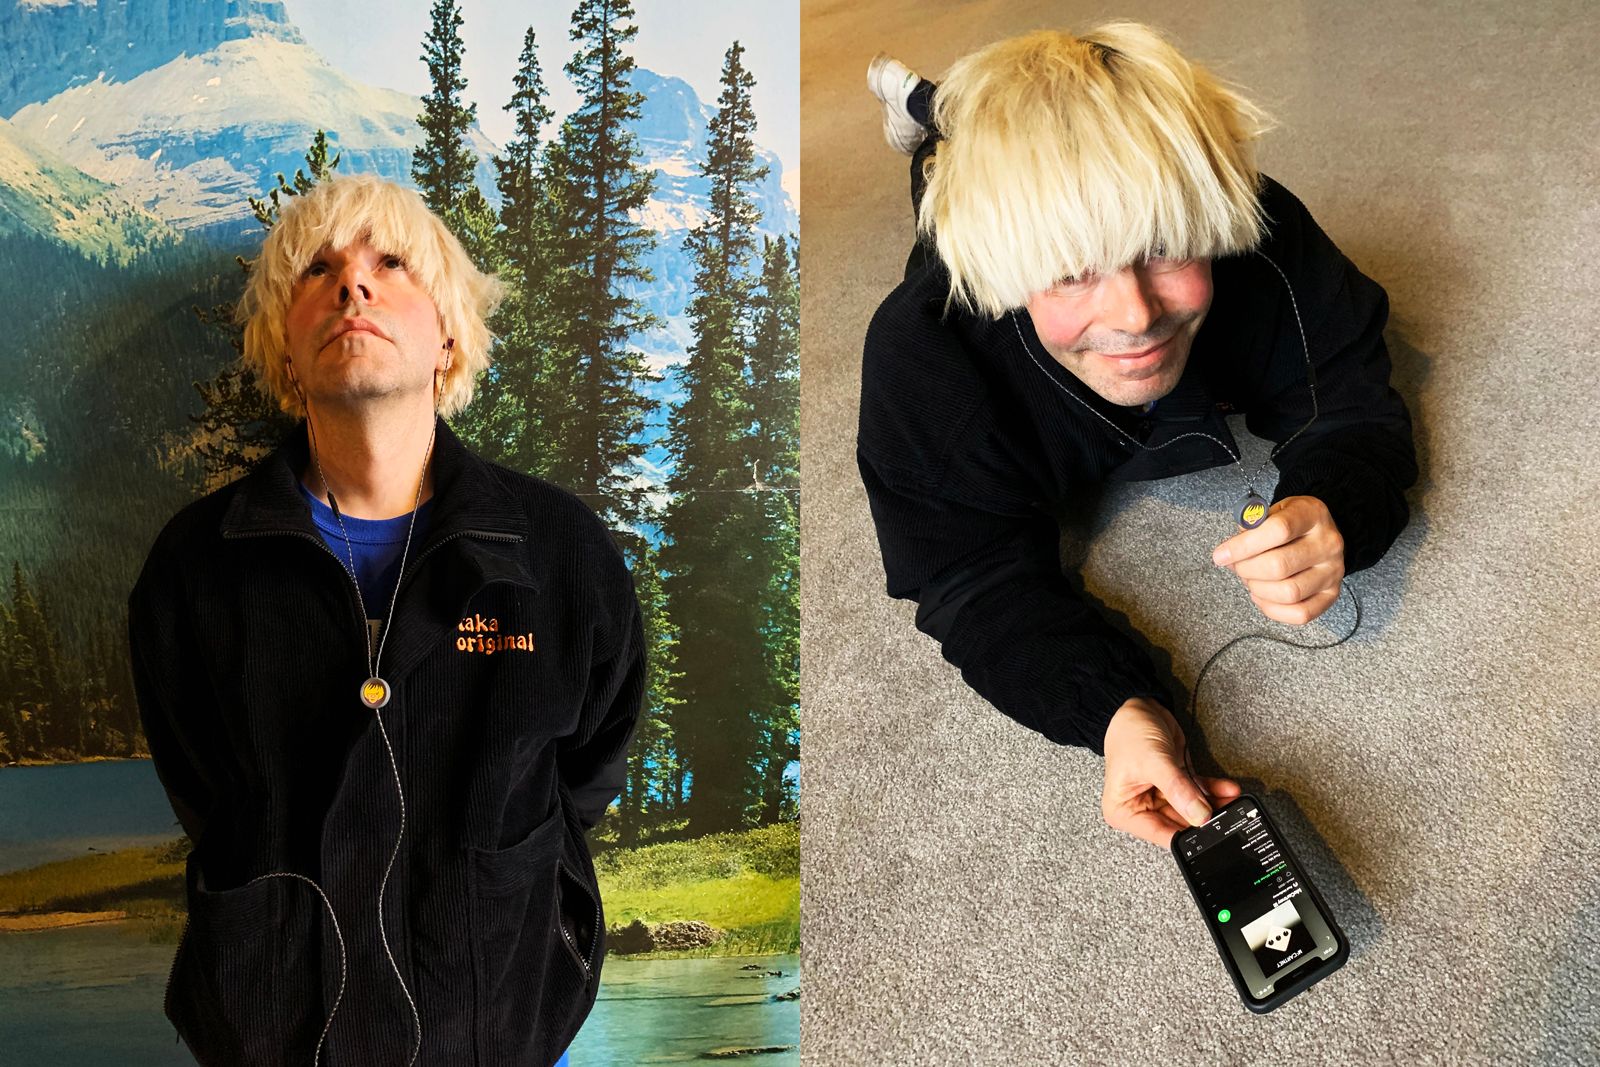 The Charlatans' Tim Burgess launches Listening Party Headphones in aid of the Music Venue Trust photo 2